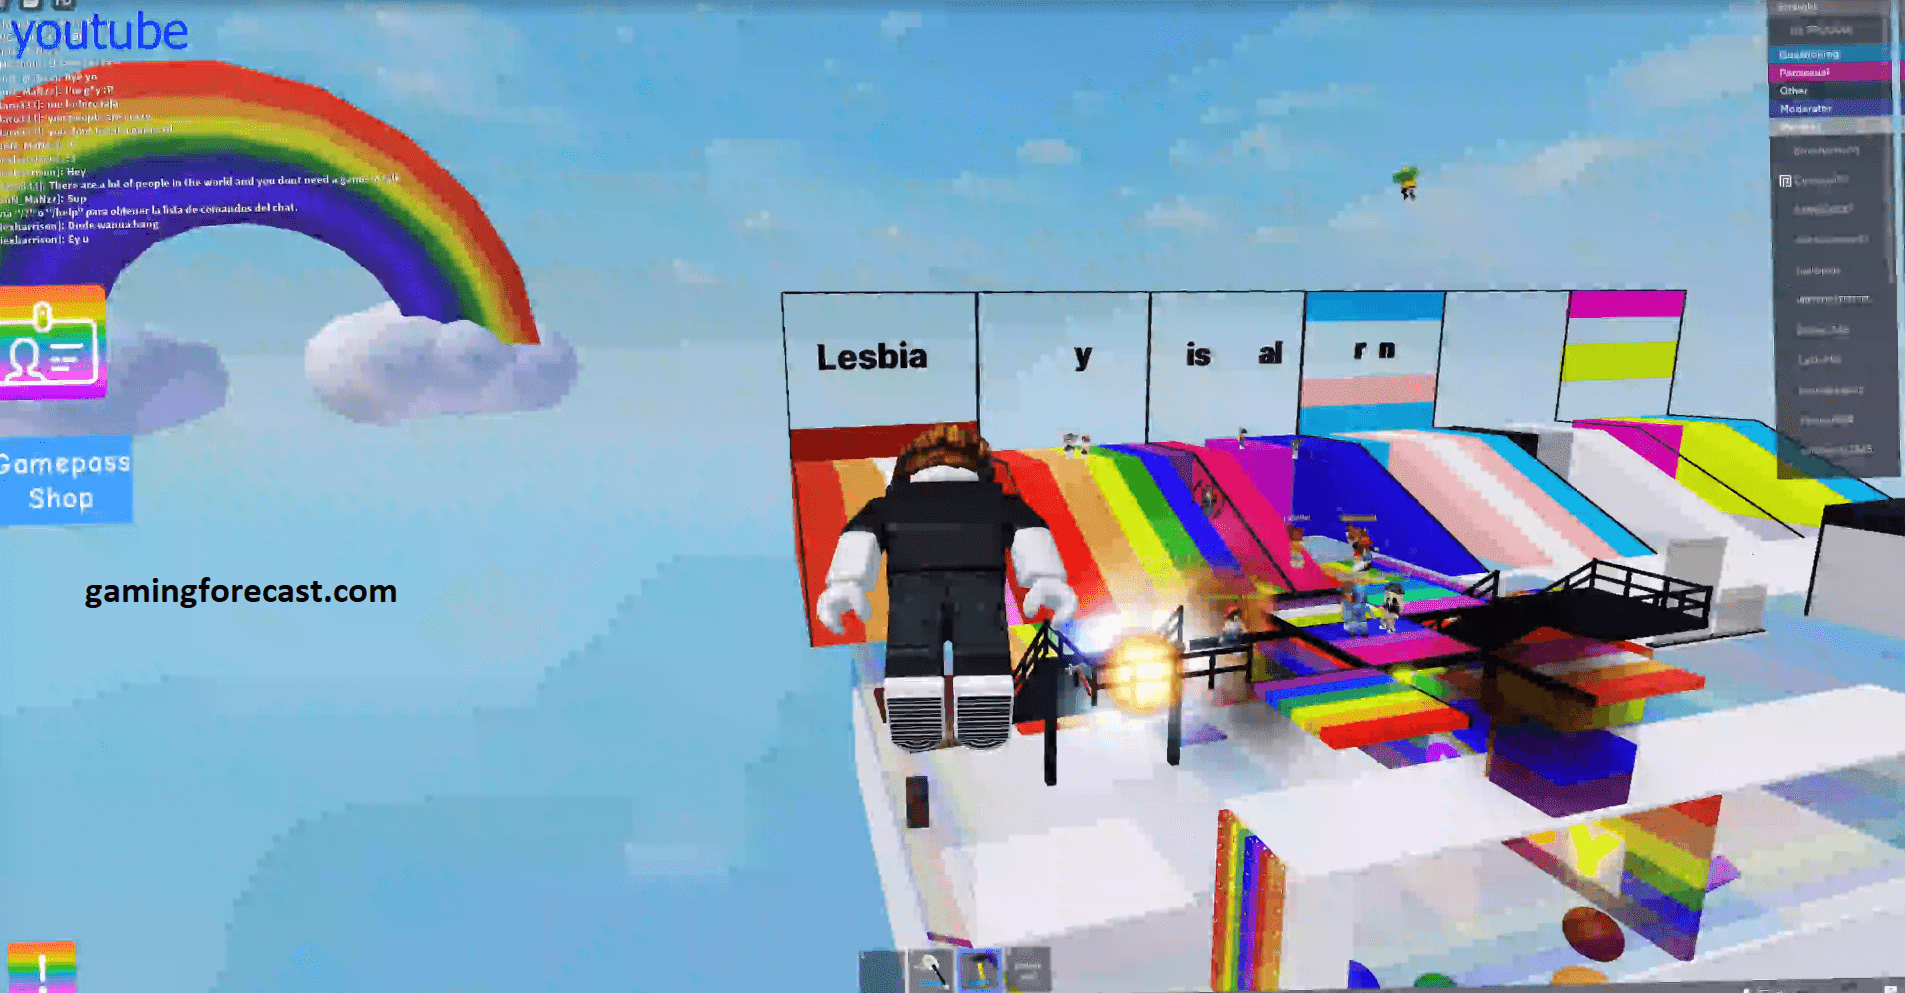 Roblox Hack Download Pc Destroy Lobby Fly Aimbot Scripts 2021 Gaming Forecast Download Free Online Game Hacks - hacking app for hacking roblox jailbreak